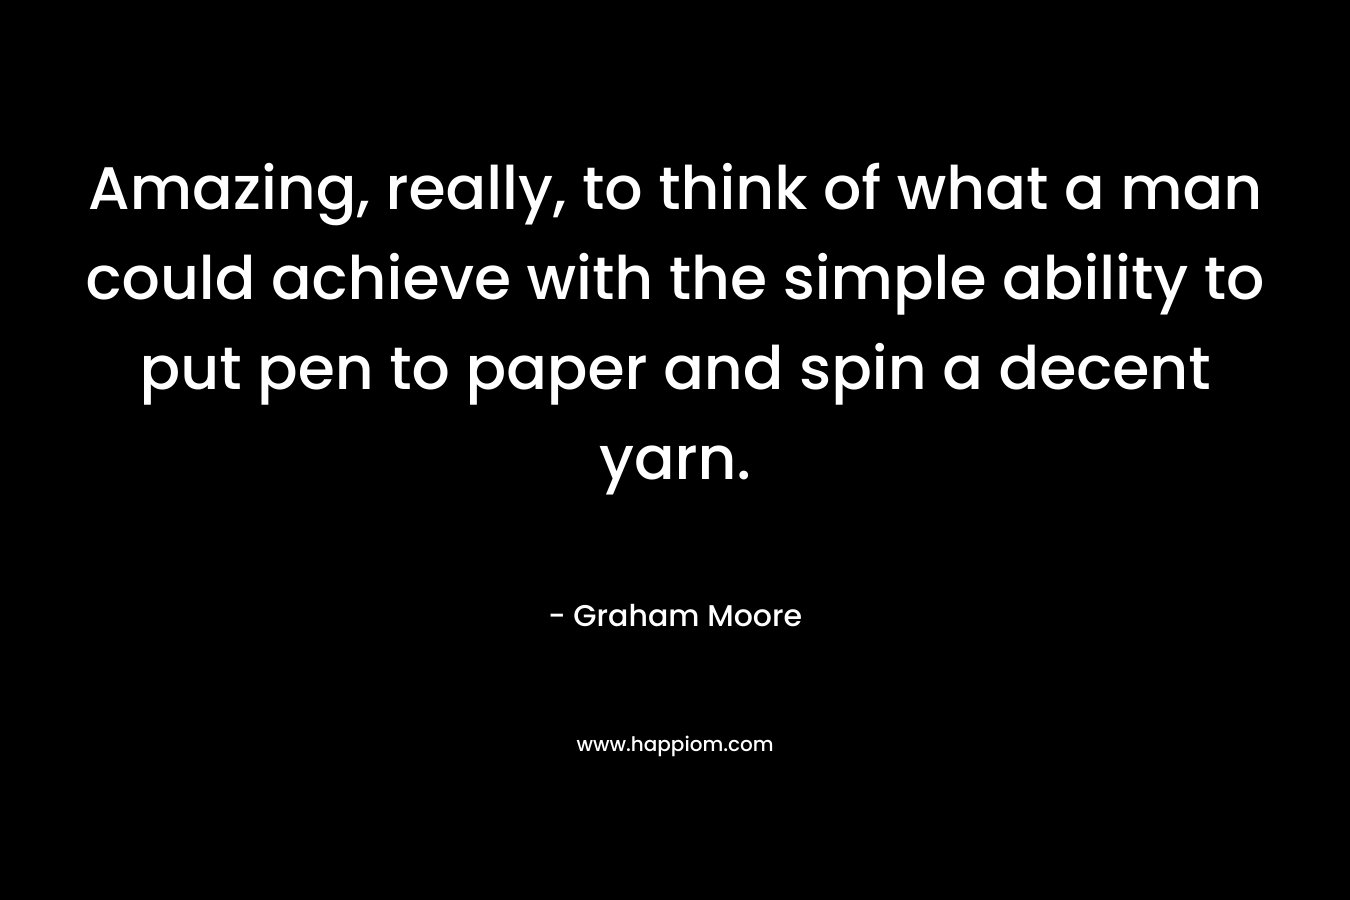 Amazing, really, to think of what a man could achieve with the simple ability to put pen to paper and spin a decent yarn. – Graham Moore